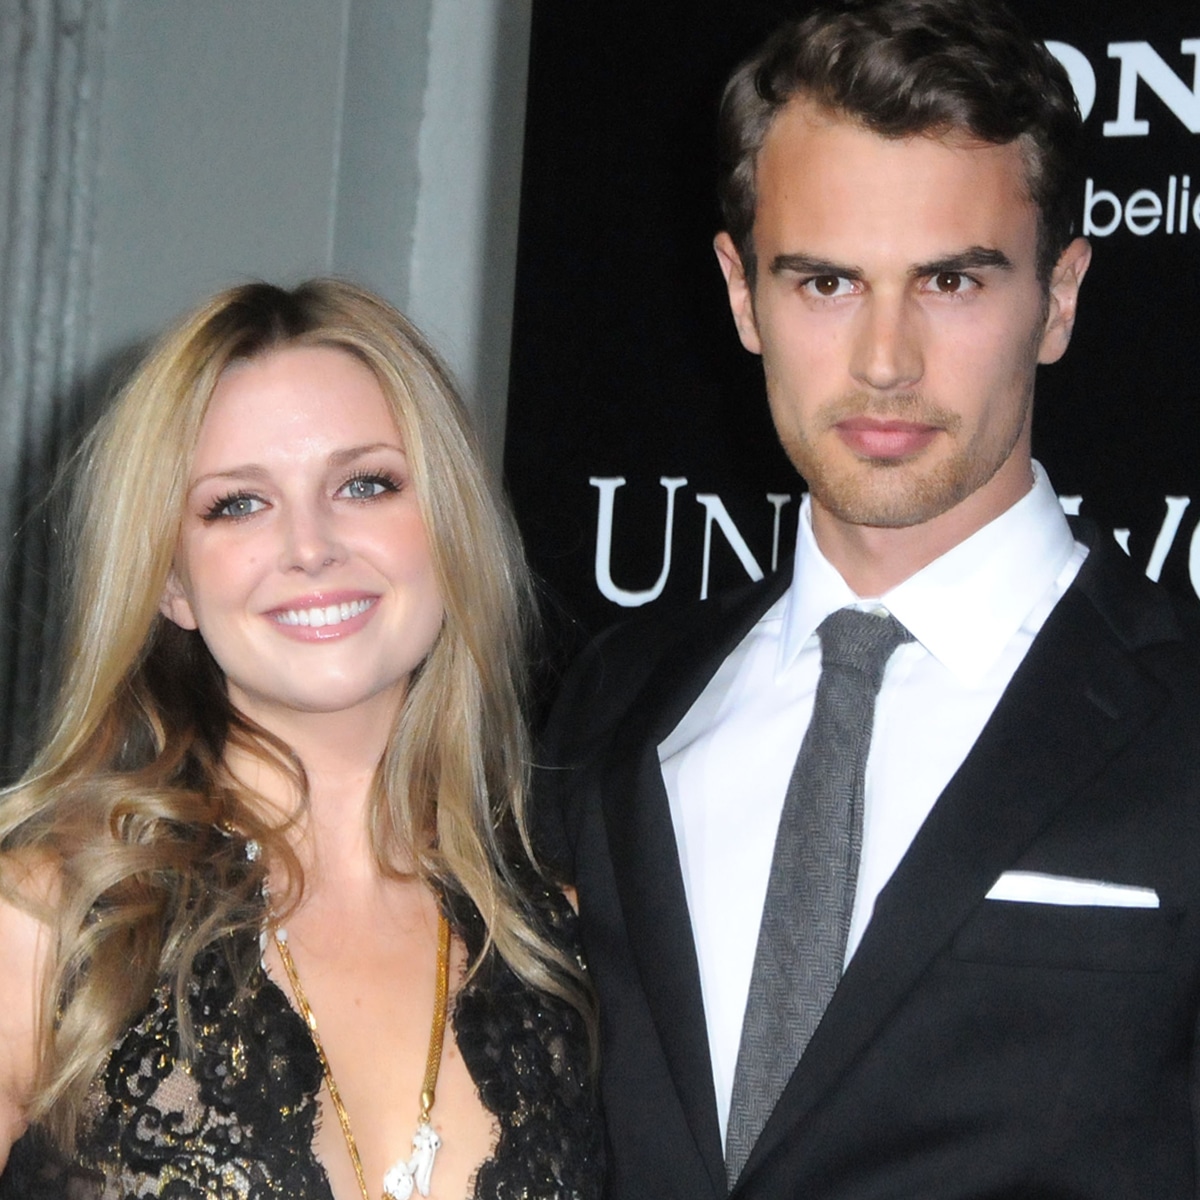 All You Need To Know About Theo James' Wife And Their Relationship